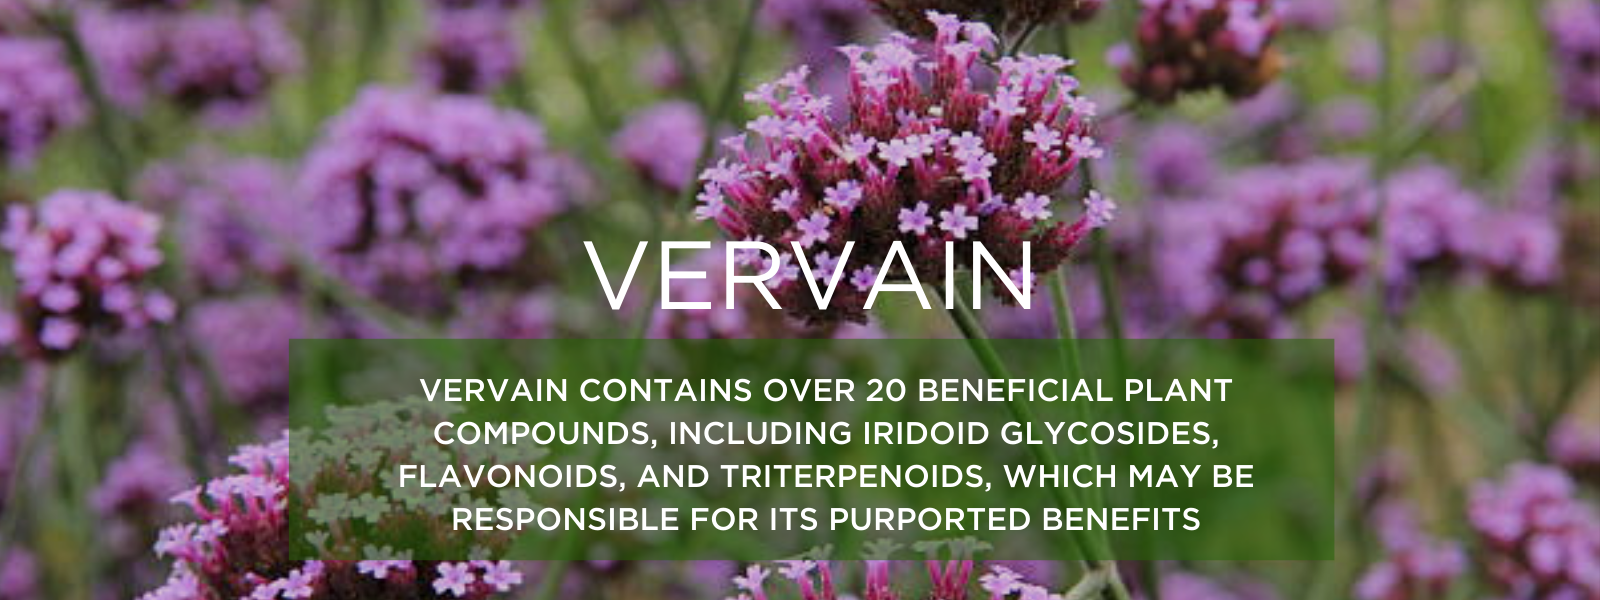 Vervain - Health Benefits, Uses and Important Facts